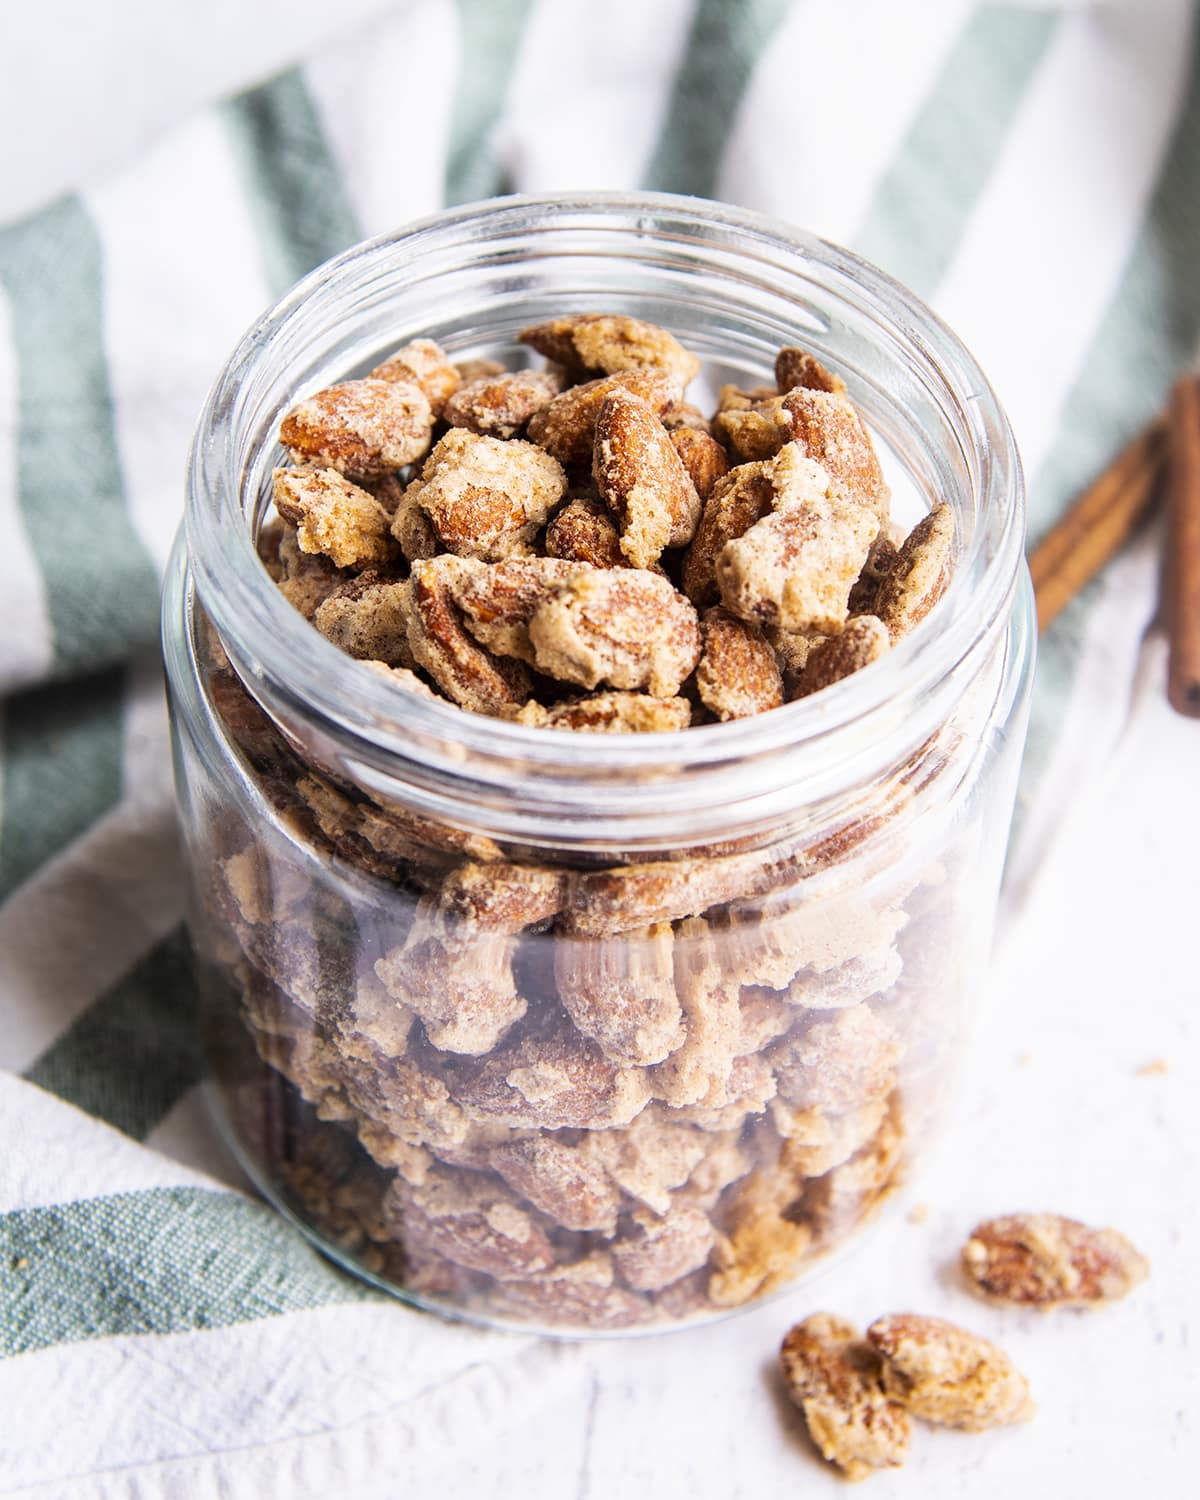 A glass jar full of candied almonds.